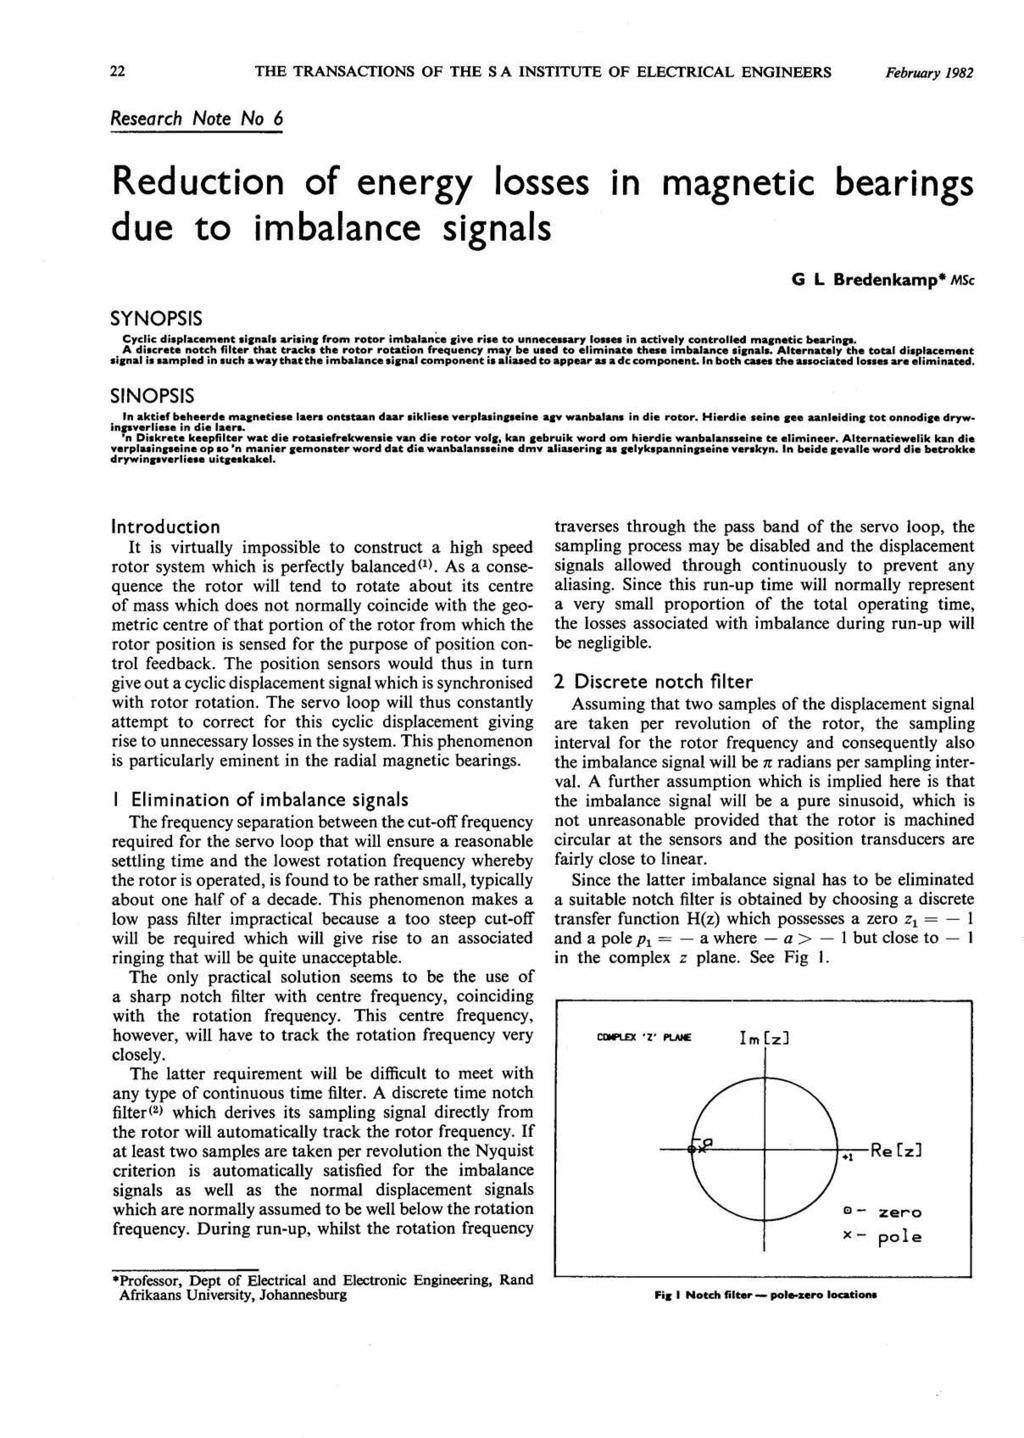 22THE TRANSACTIONS OF THE S A INSTITUTE OF ELECTRICAL ENGINEERS February 1982 Research Note No 6 Reduction of energy losses in magnetic bearings due to imbalance signals G L Bredenkamp* MSc SYNOPSIS